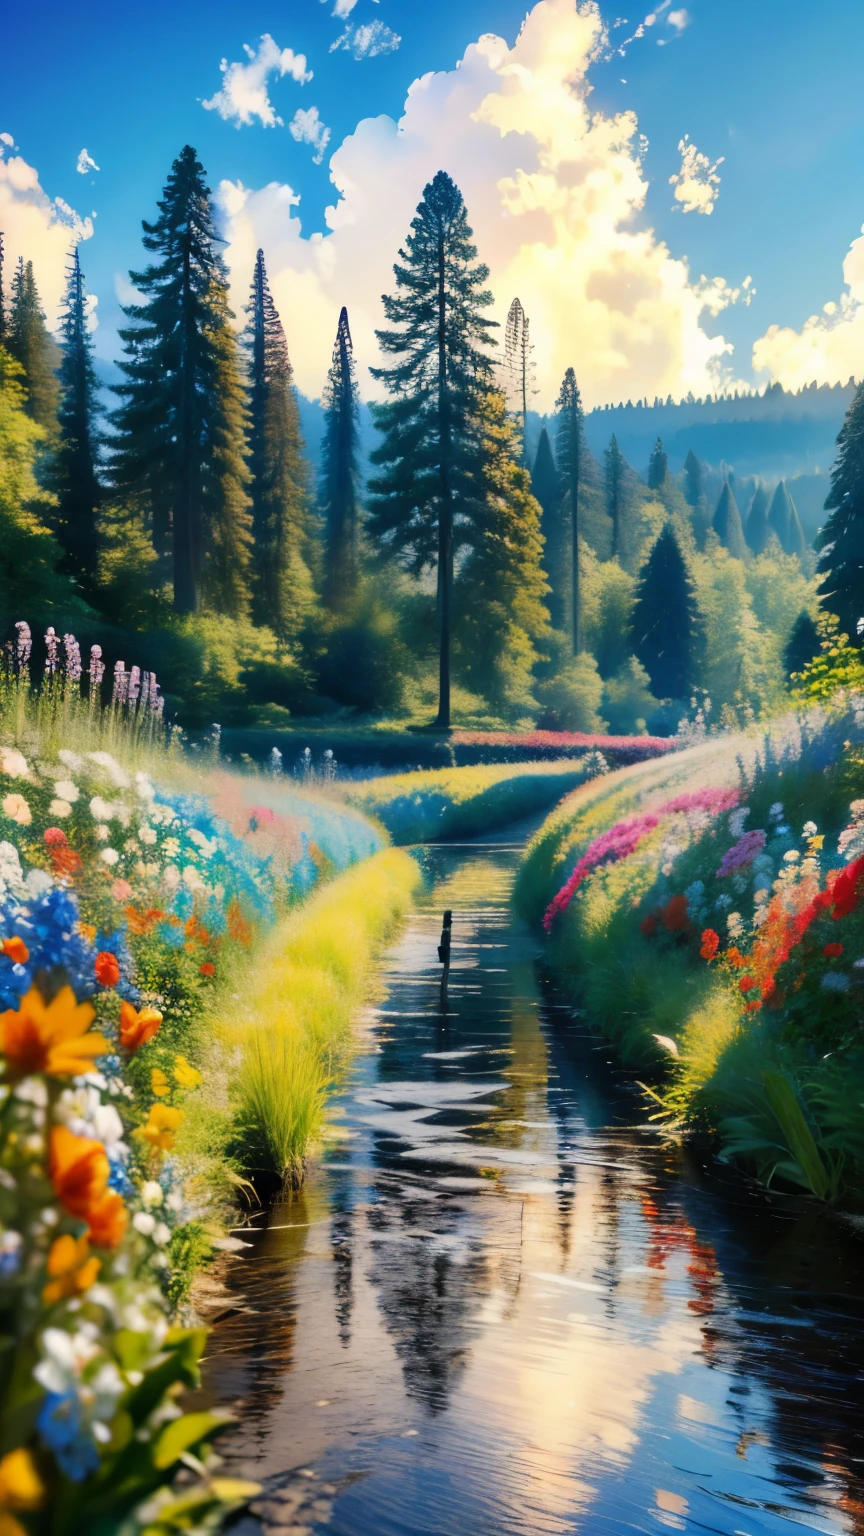 Sunny day landscape images, Only landscapes with flowers, Flower Field, unmanned, There are no animals, Lively and childlike, Art Style, comics, artistic, Soft color palette, As if blown by the wind々Various kinds of flowers, Luminance, Magical Pictures, Soft lighting, Light background, Realistic photos, Very detailed, 4K, High resolution, Ultra-thin Sharp,  high quality, Individuality, Beautiful colors, 3D Rendering,  